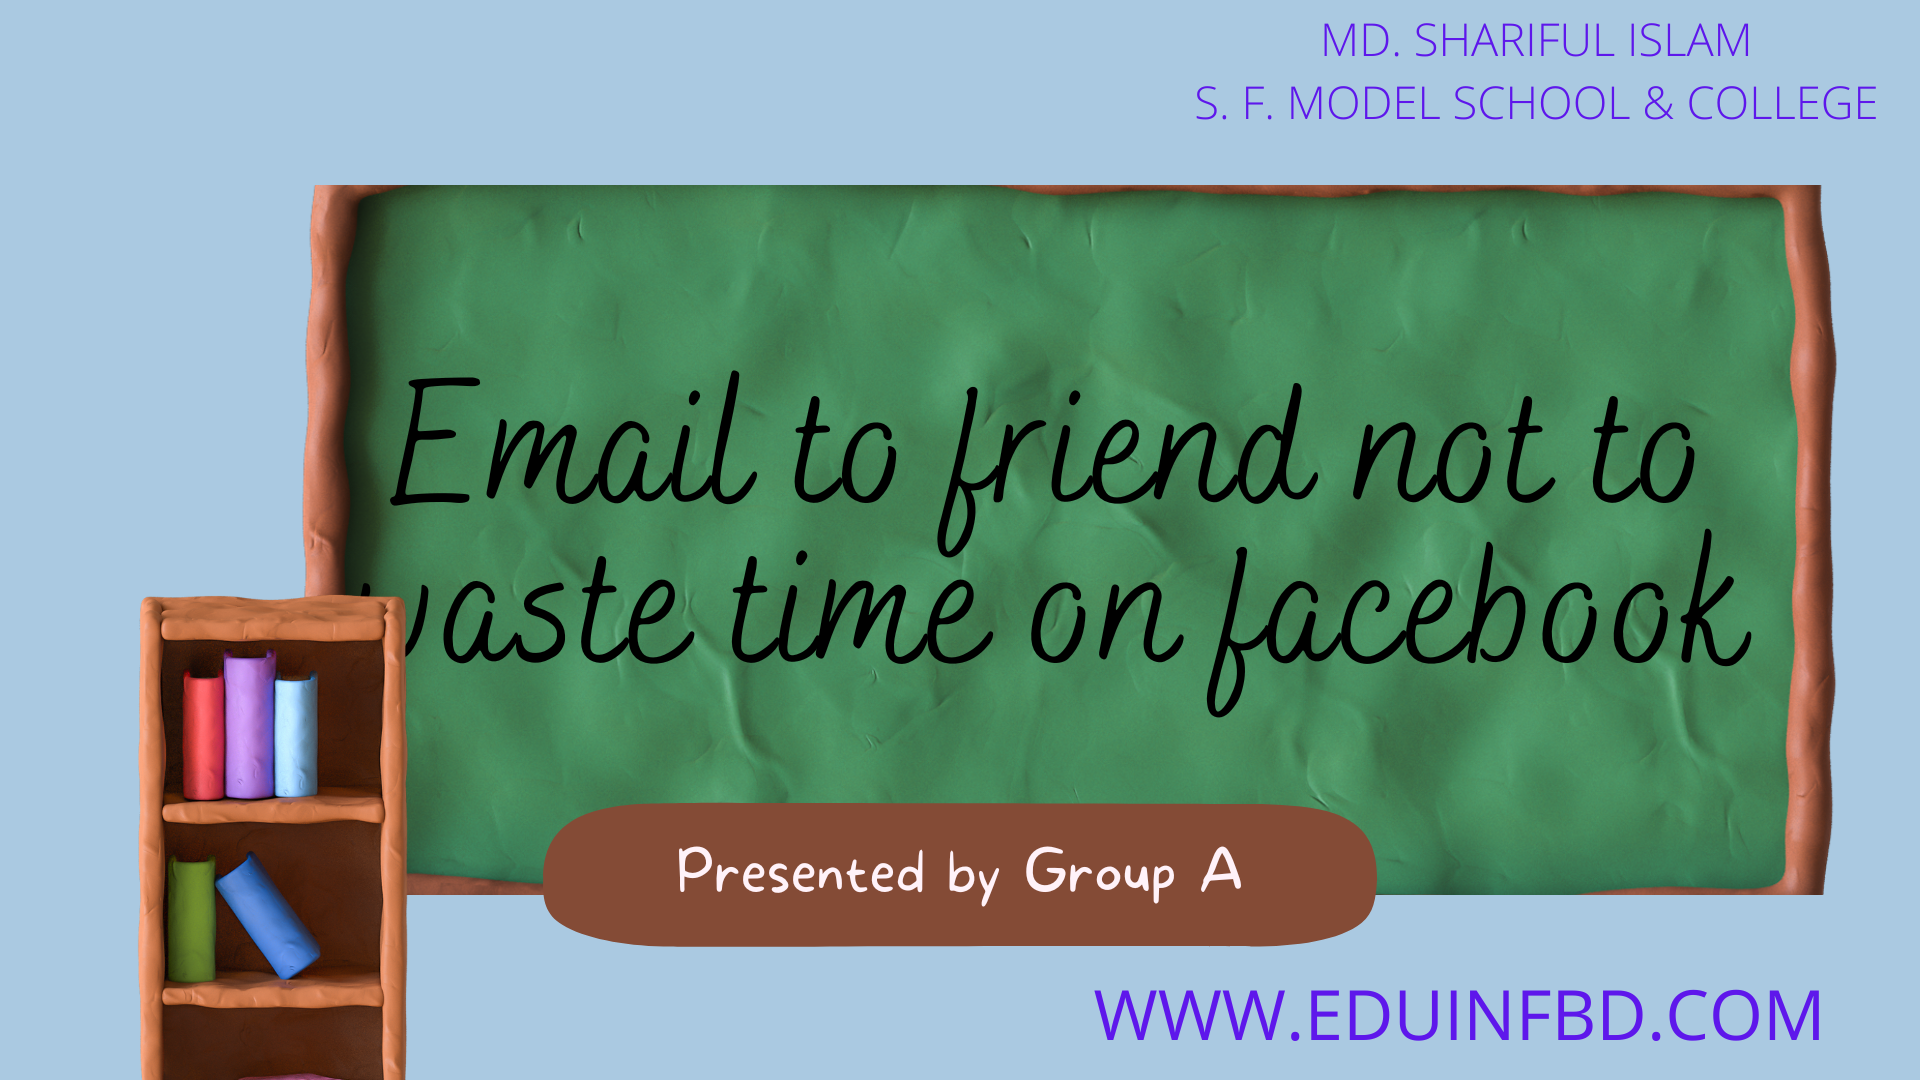 Email advising not to waste time on Facebook